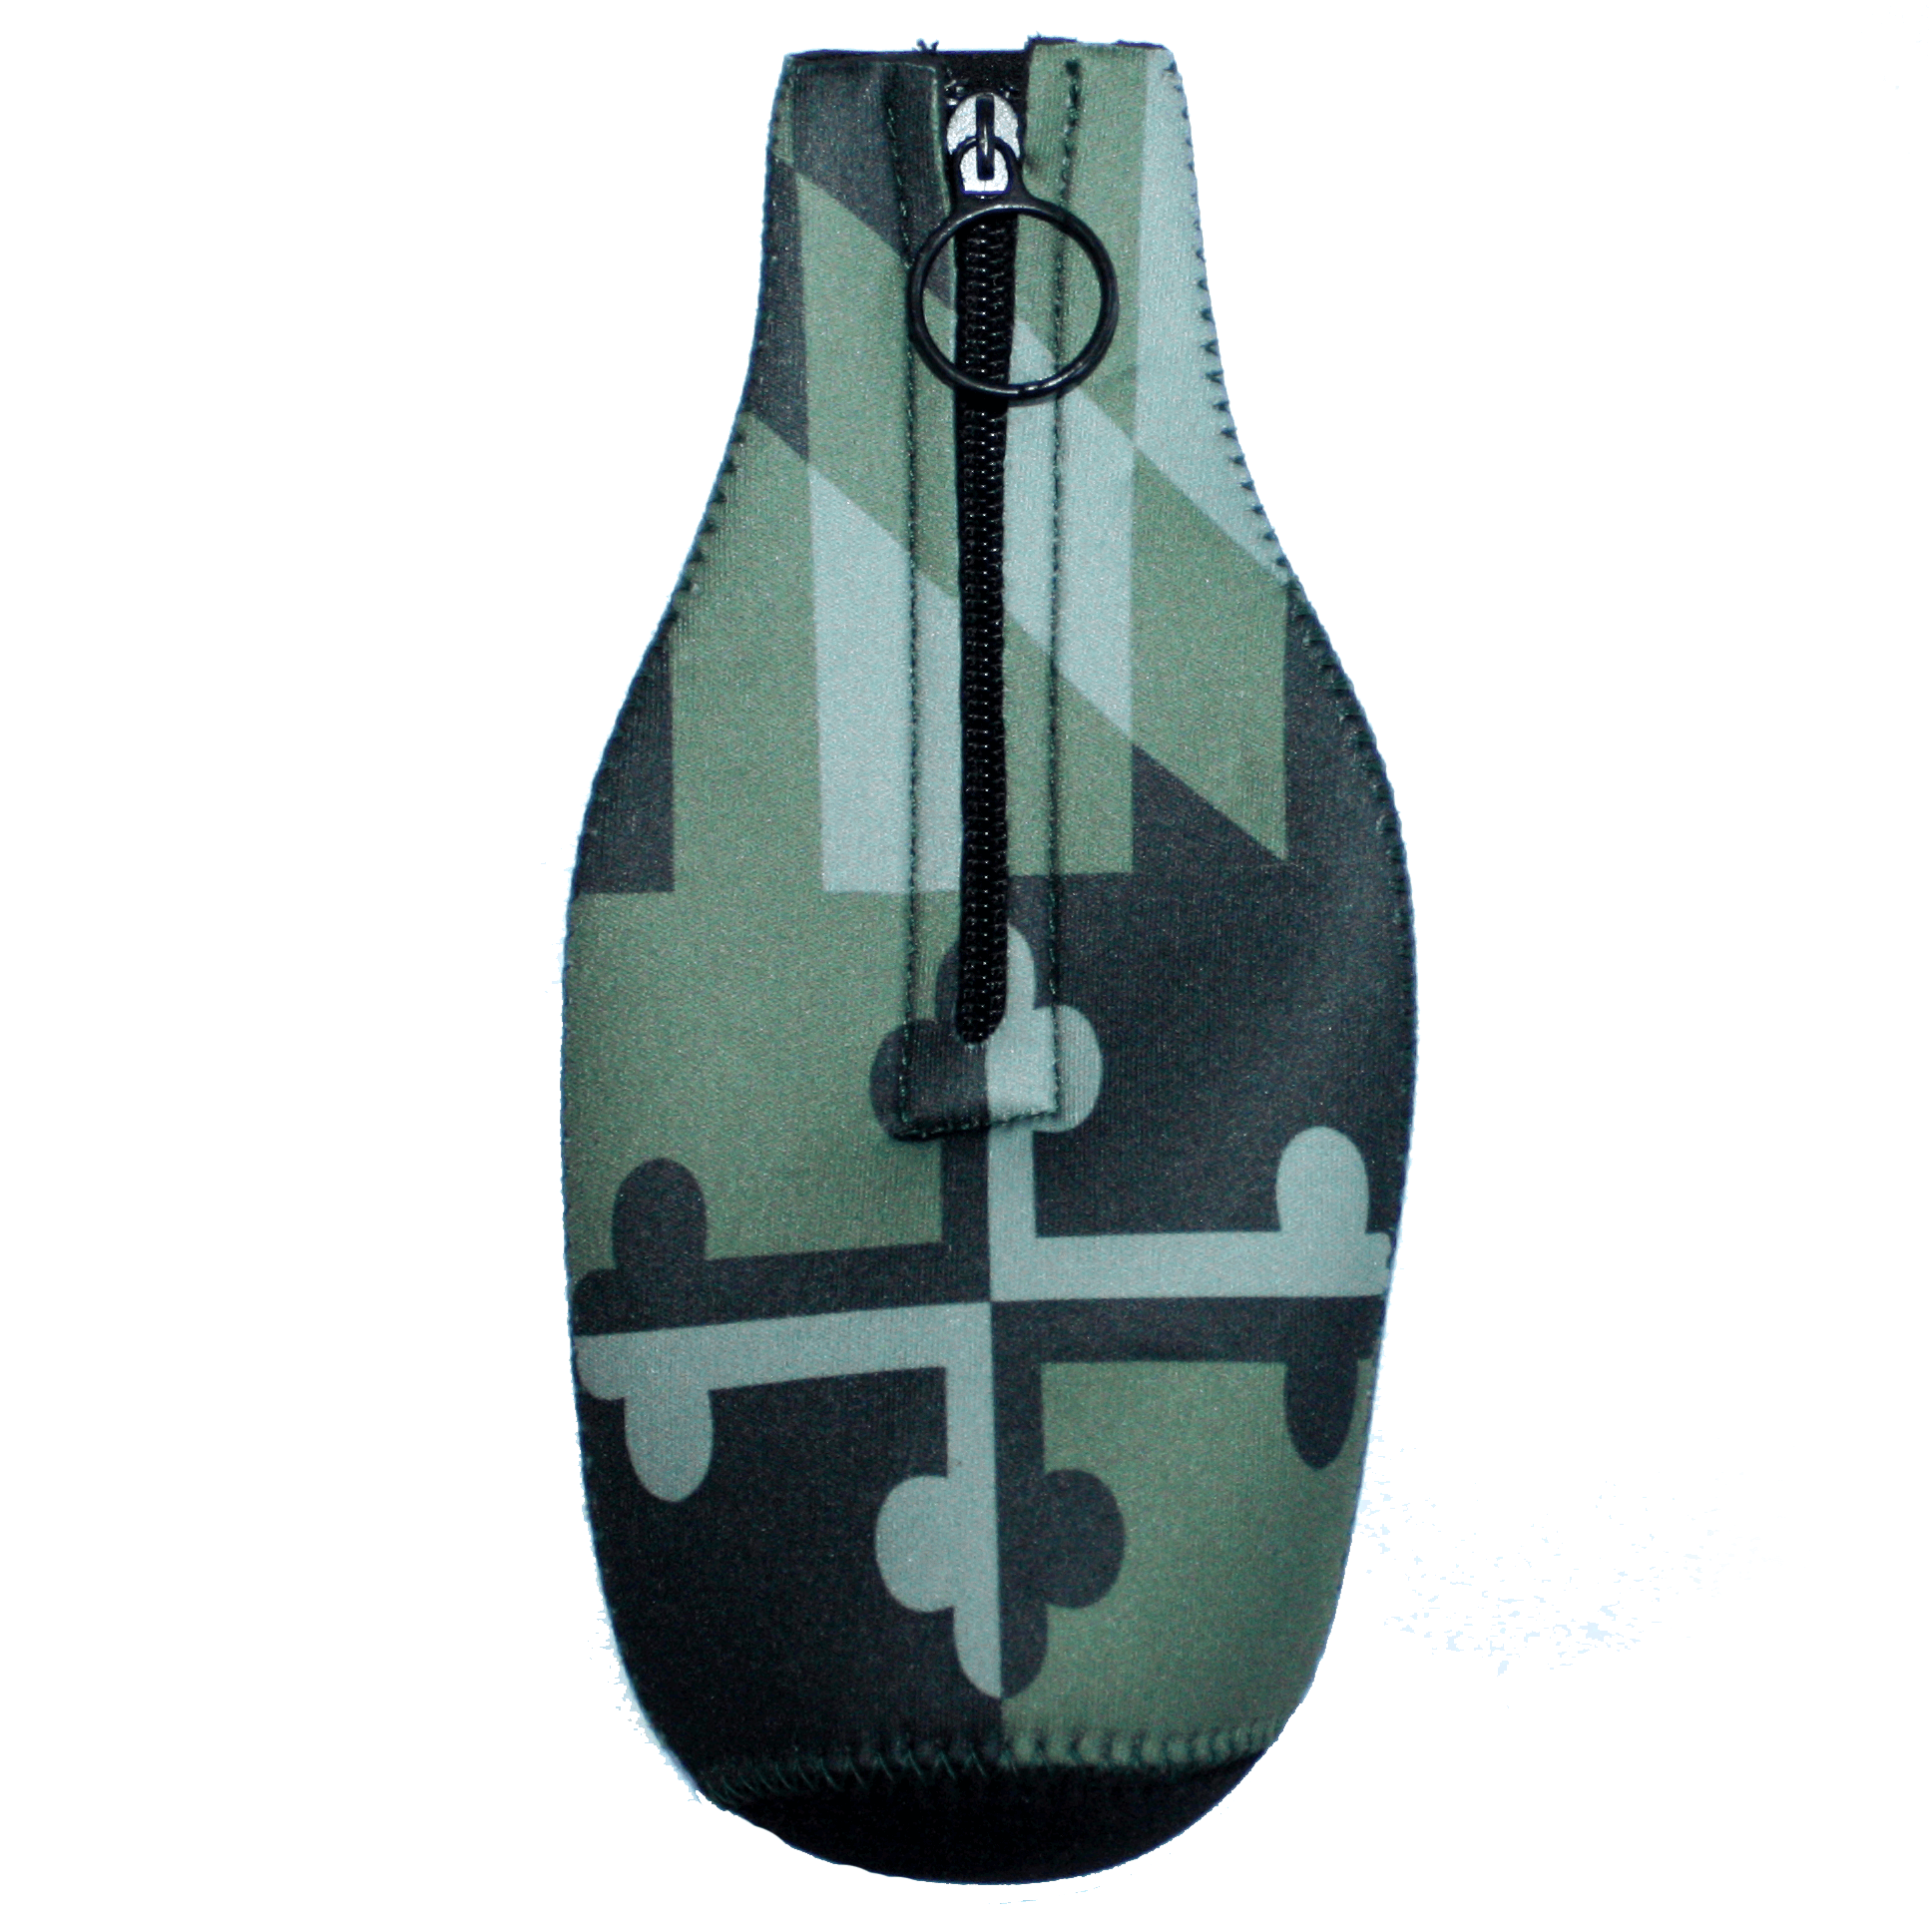 Green Camo Maryland Flag / Bottle Cooler - Route One Apparel